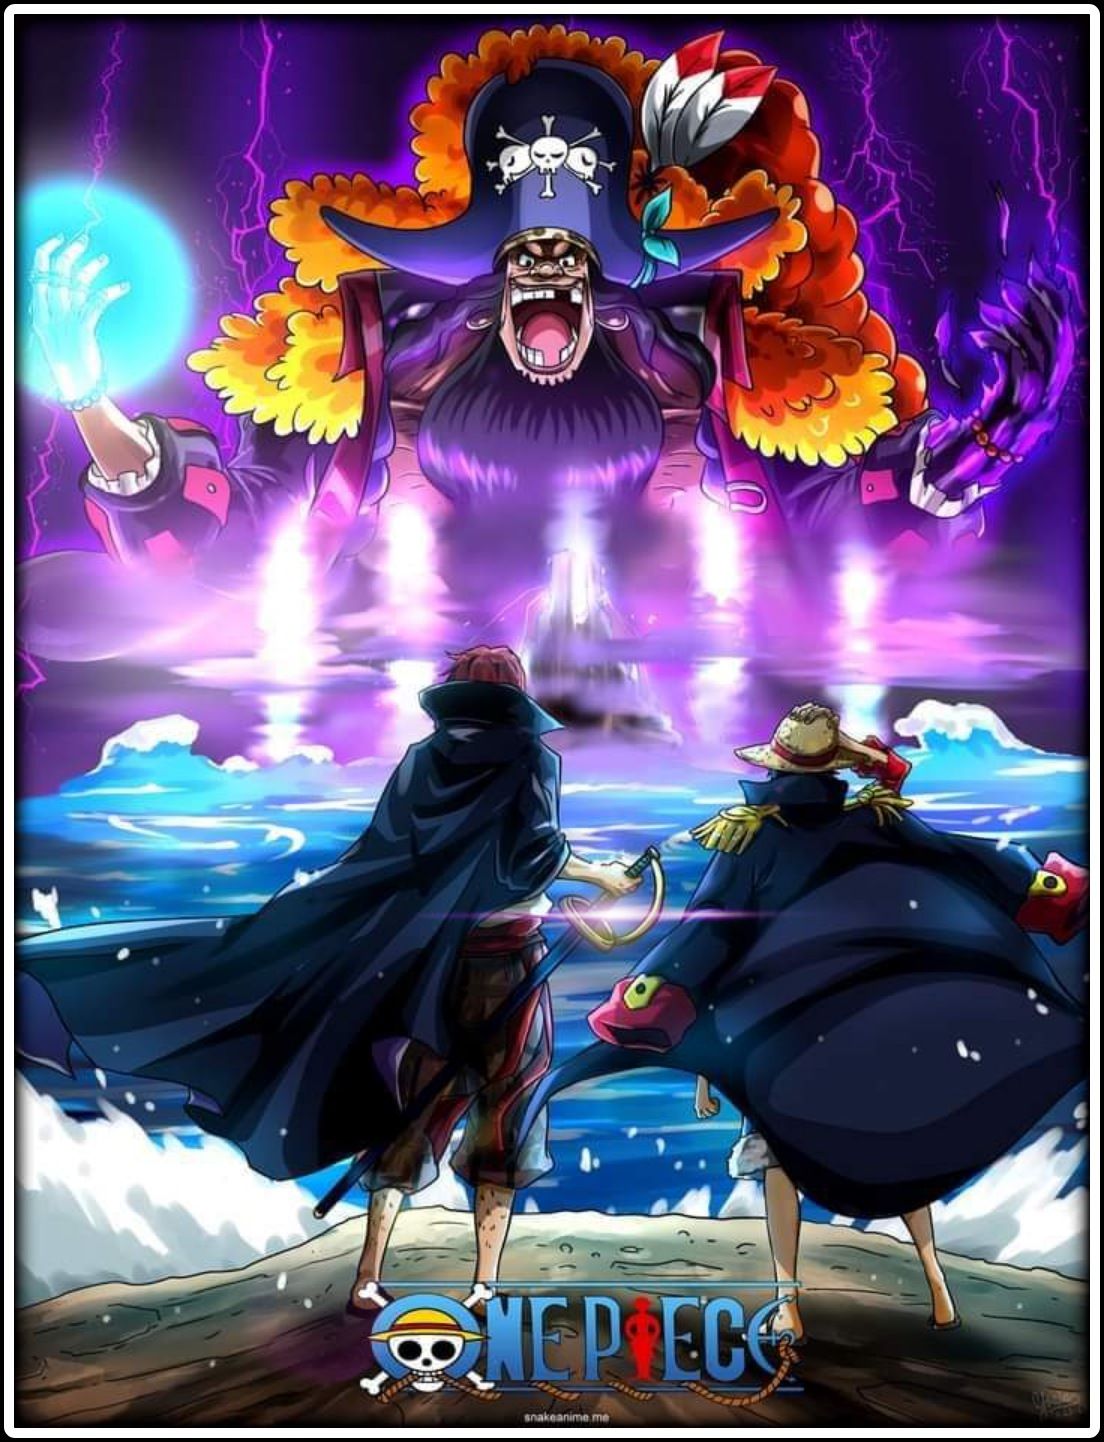 The Exciting Upcoming Battle in One Piece: Shanks, Luffy, and Red Hair Pirates vs. Kurohige and the Marines